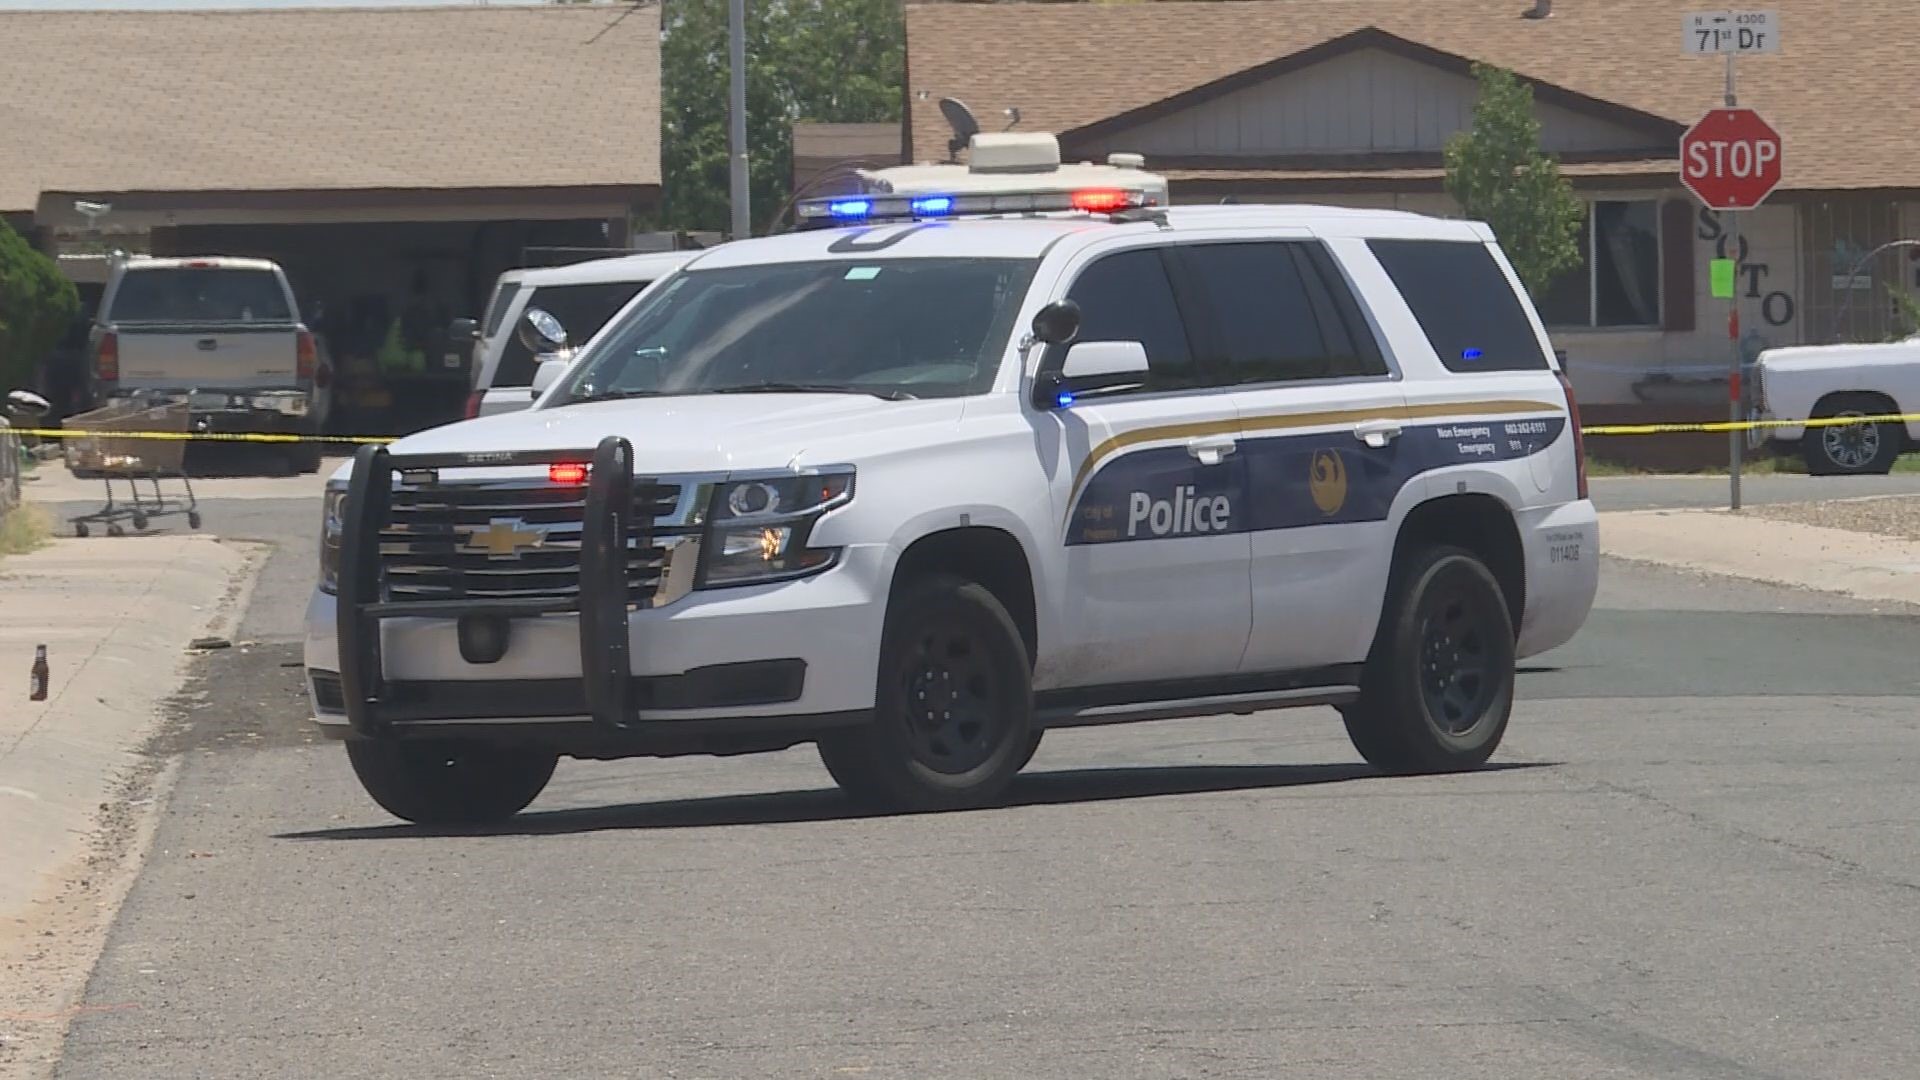 Homicides involving guns are up 45% in Phoenix compared to the same time last year. Phoenix PD is responding by starting Operation Gun Crime Crackdown.